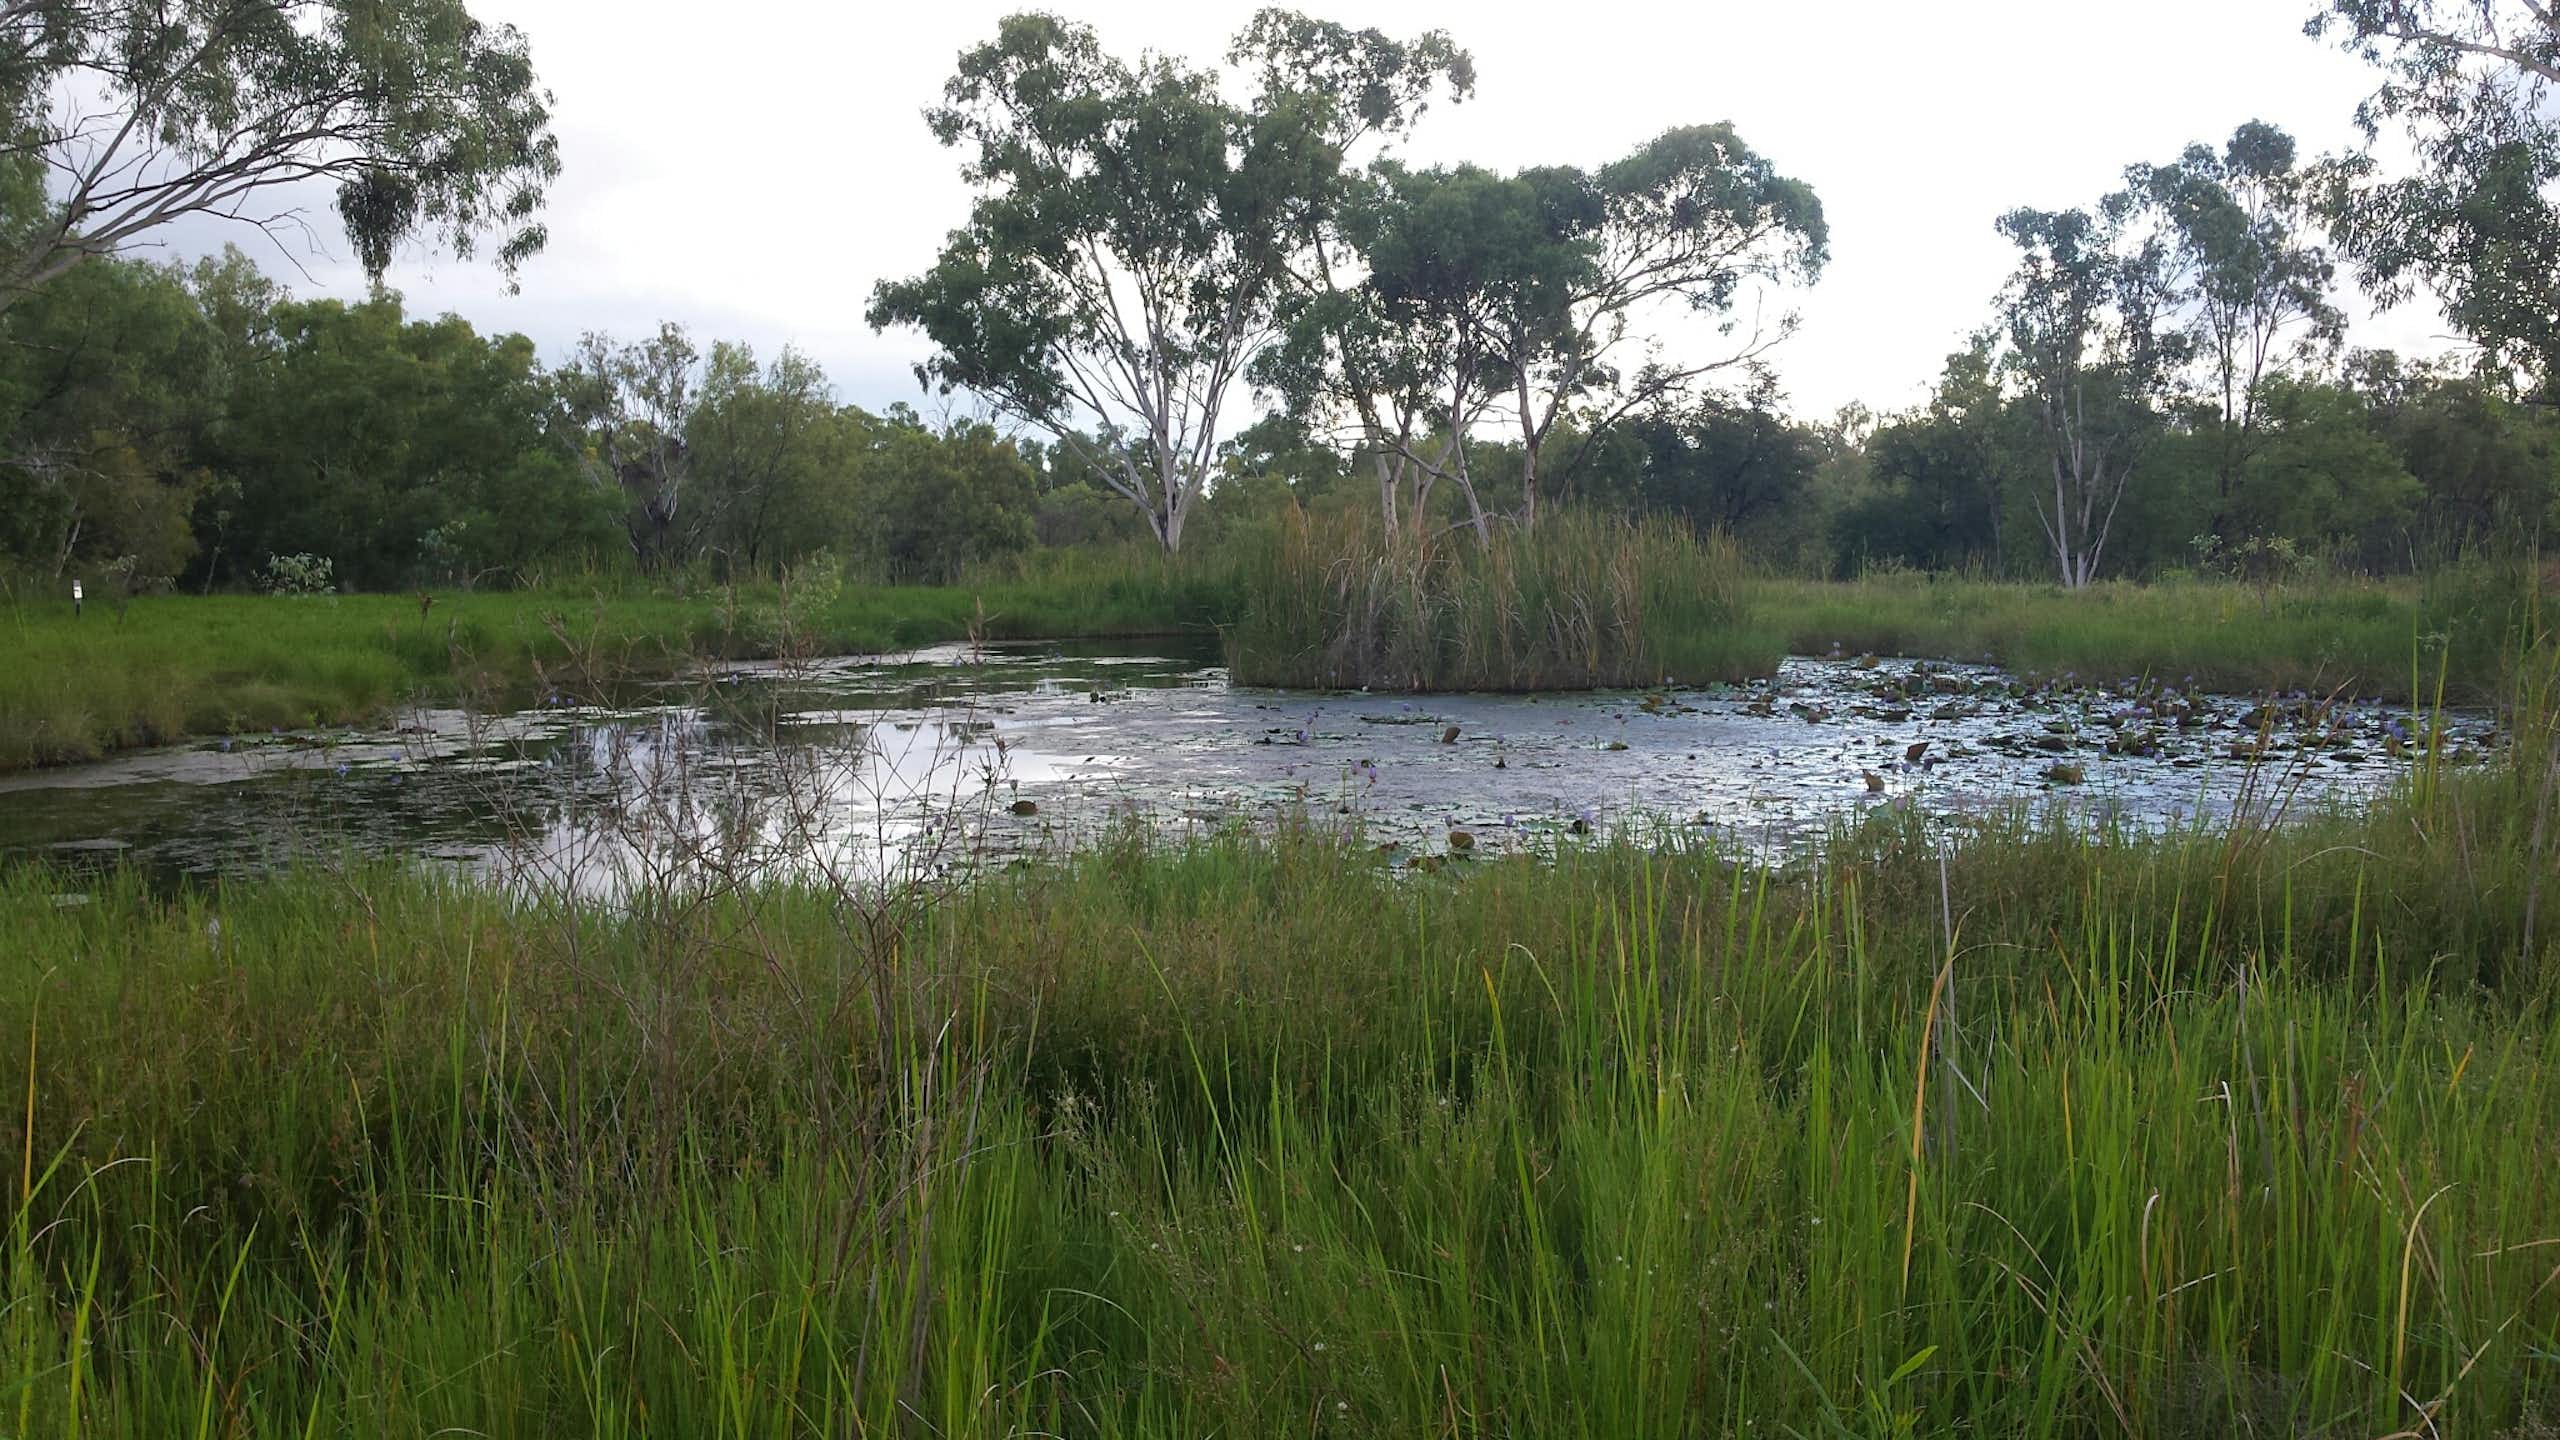 Doongmabulla springs in central Queensland, showing trees in the background, reeds in the foreground and water